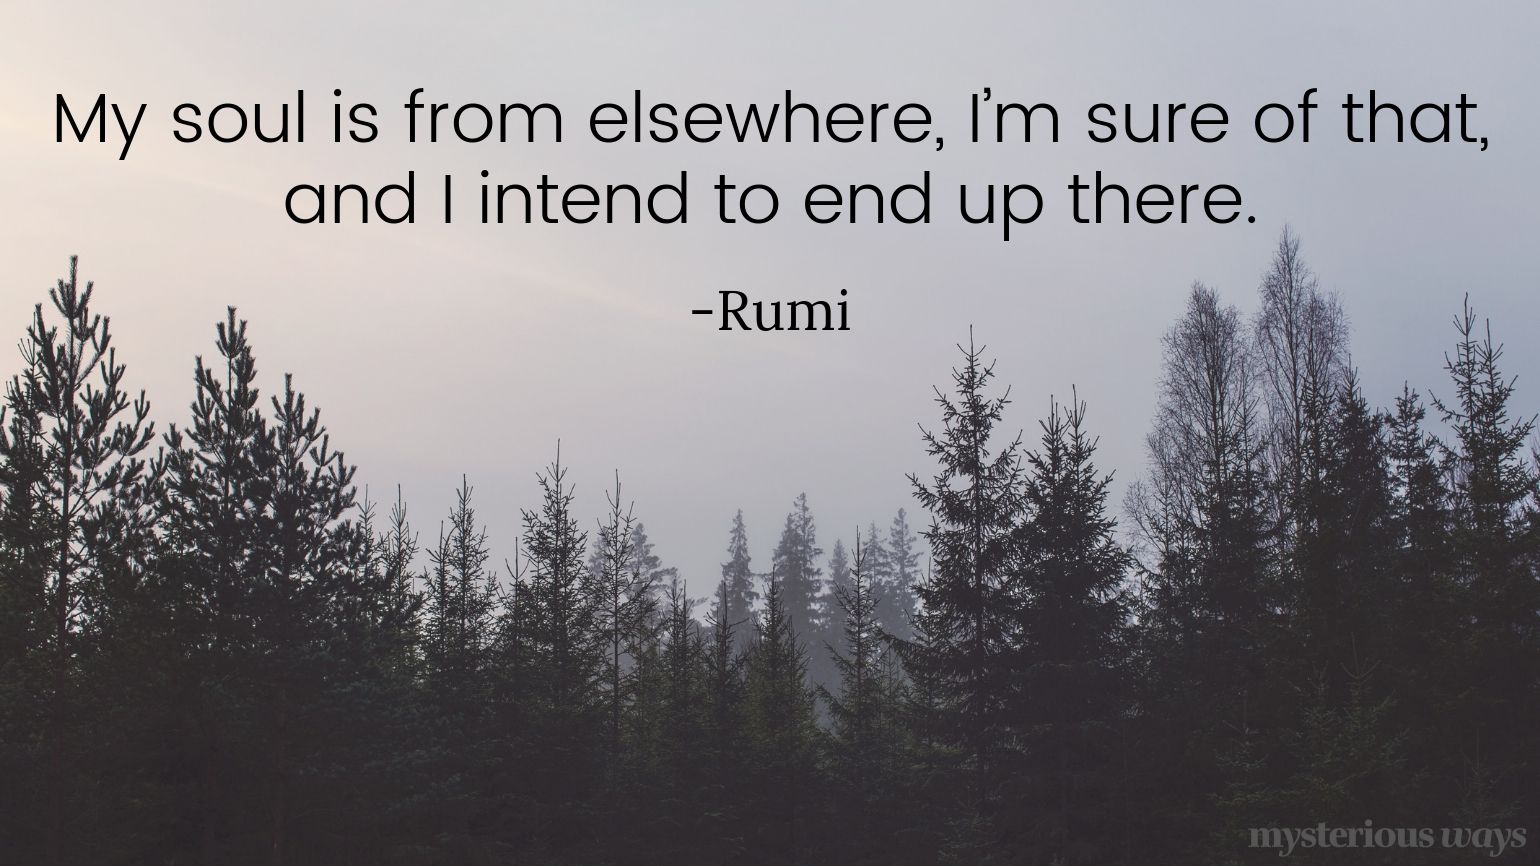 My soul is from elsewhere, I’m sure of that, and I intend to end up there. —Rumi